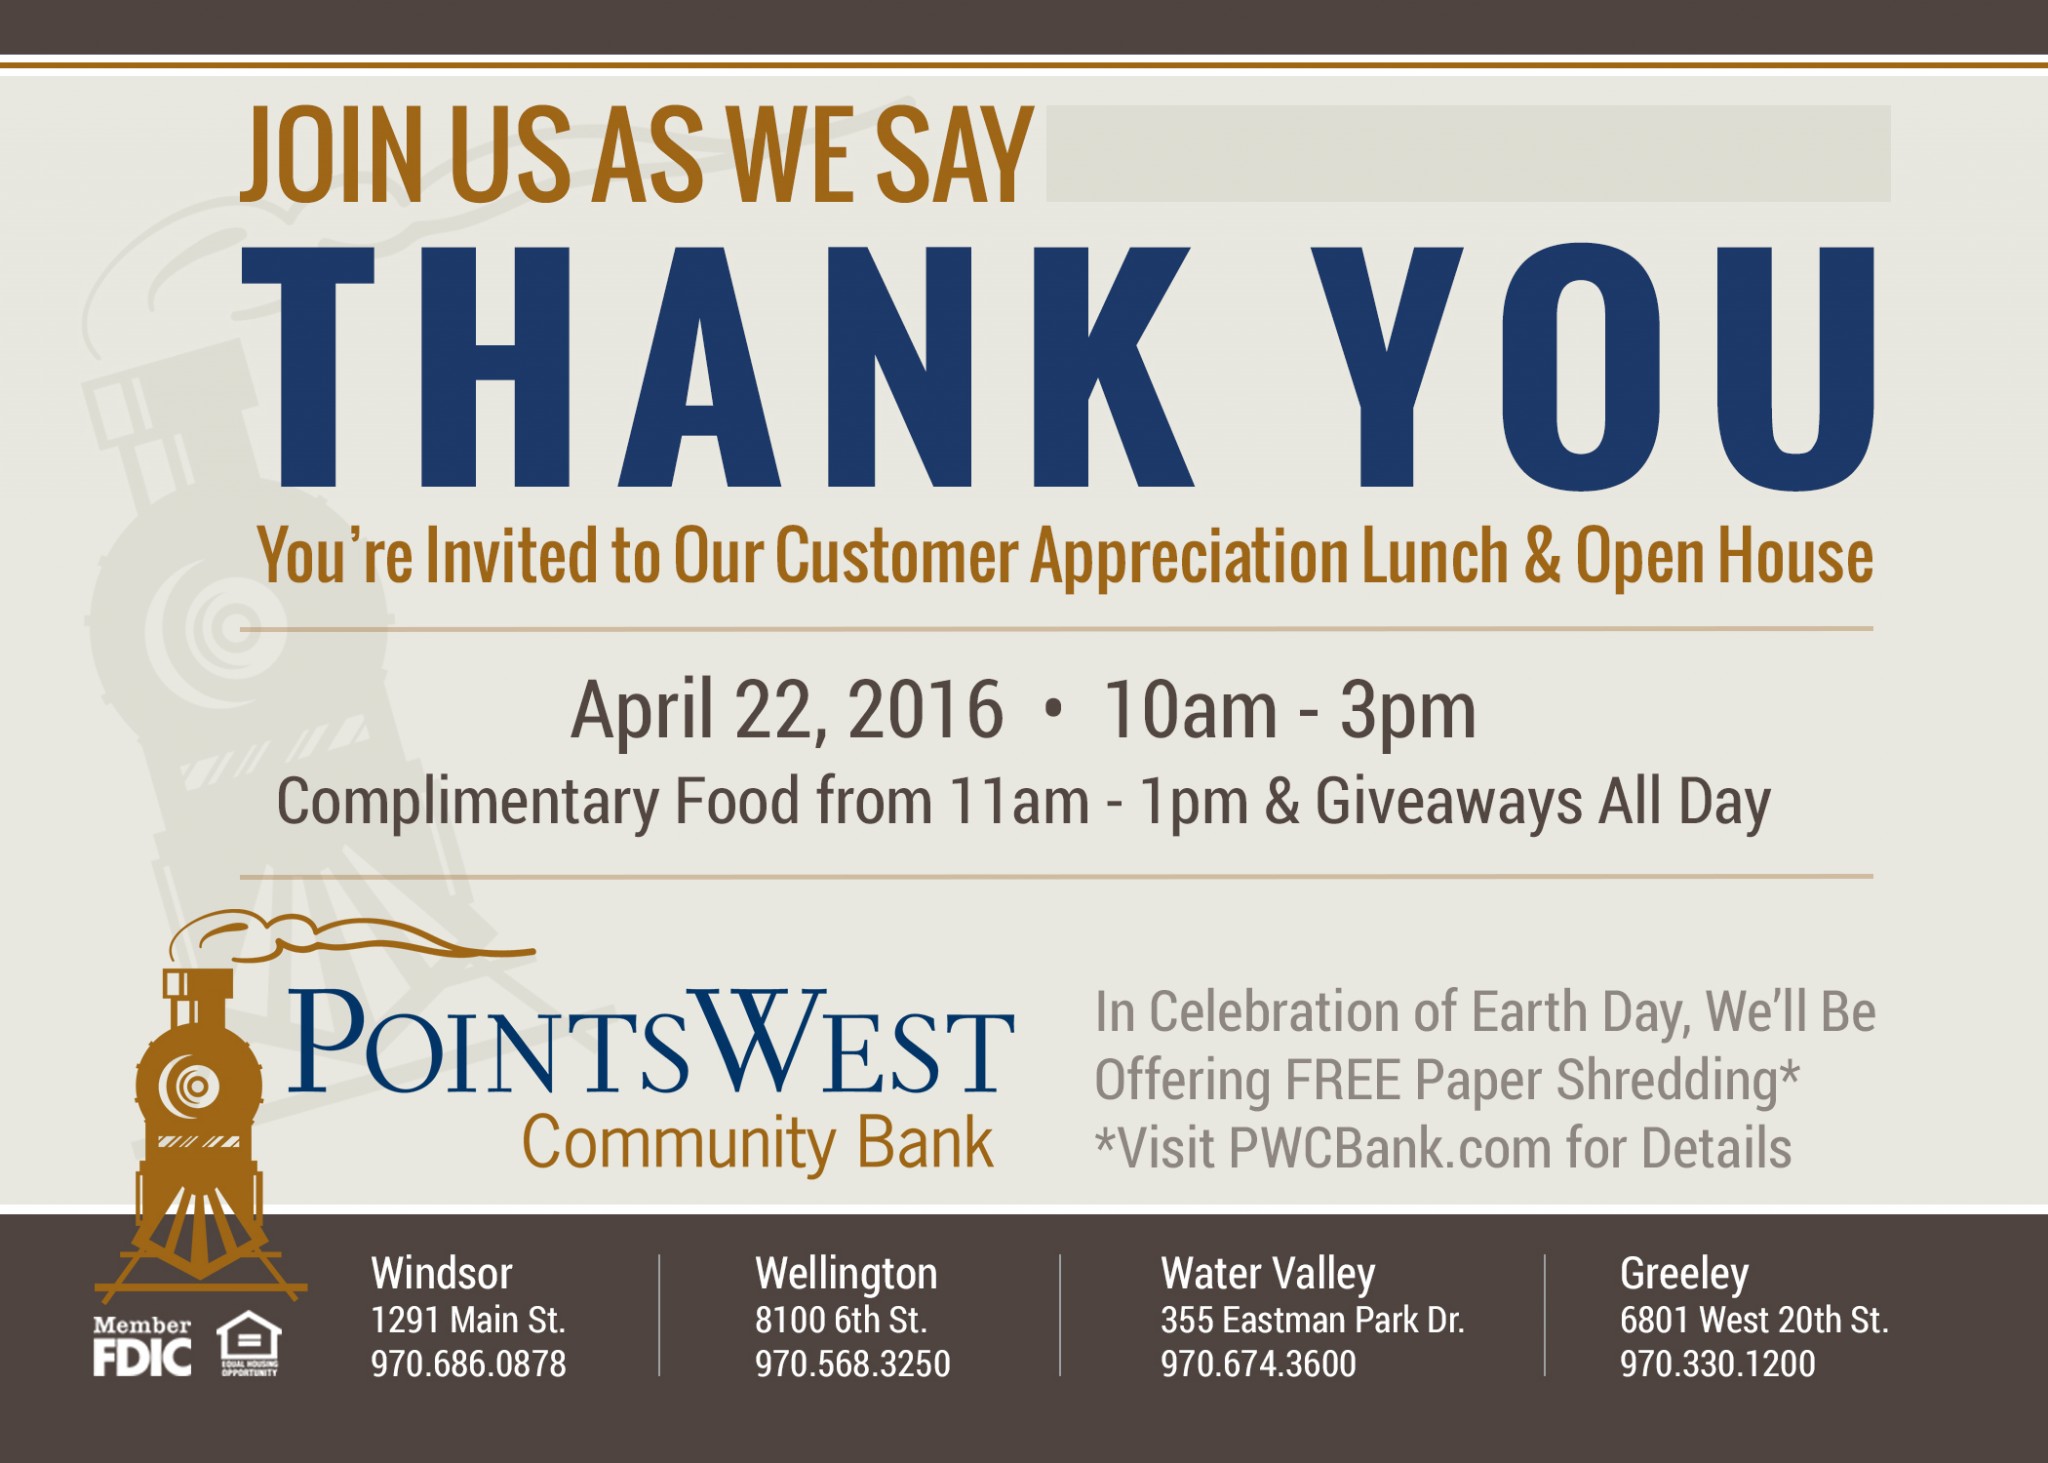 Points West Customer Bank Thank You